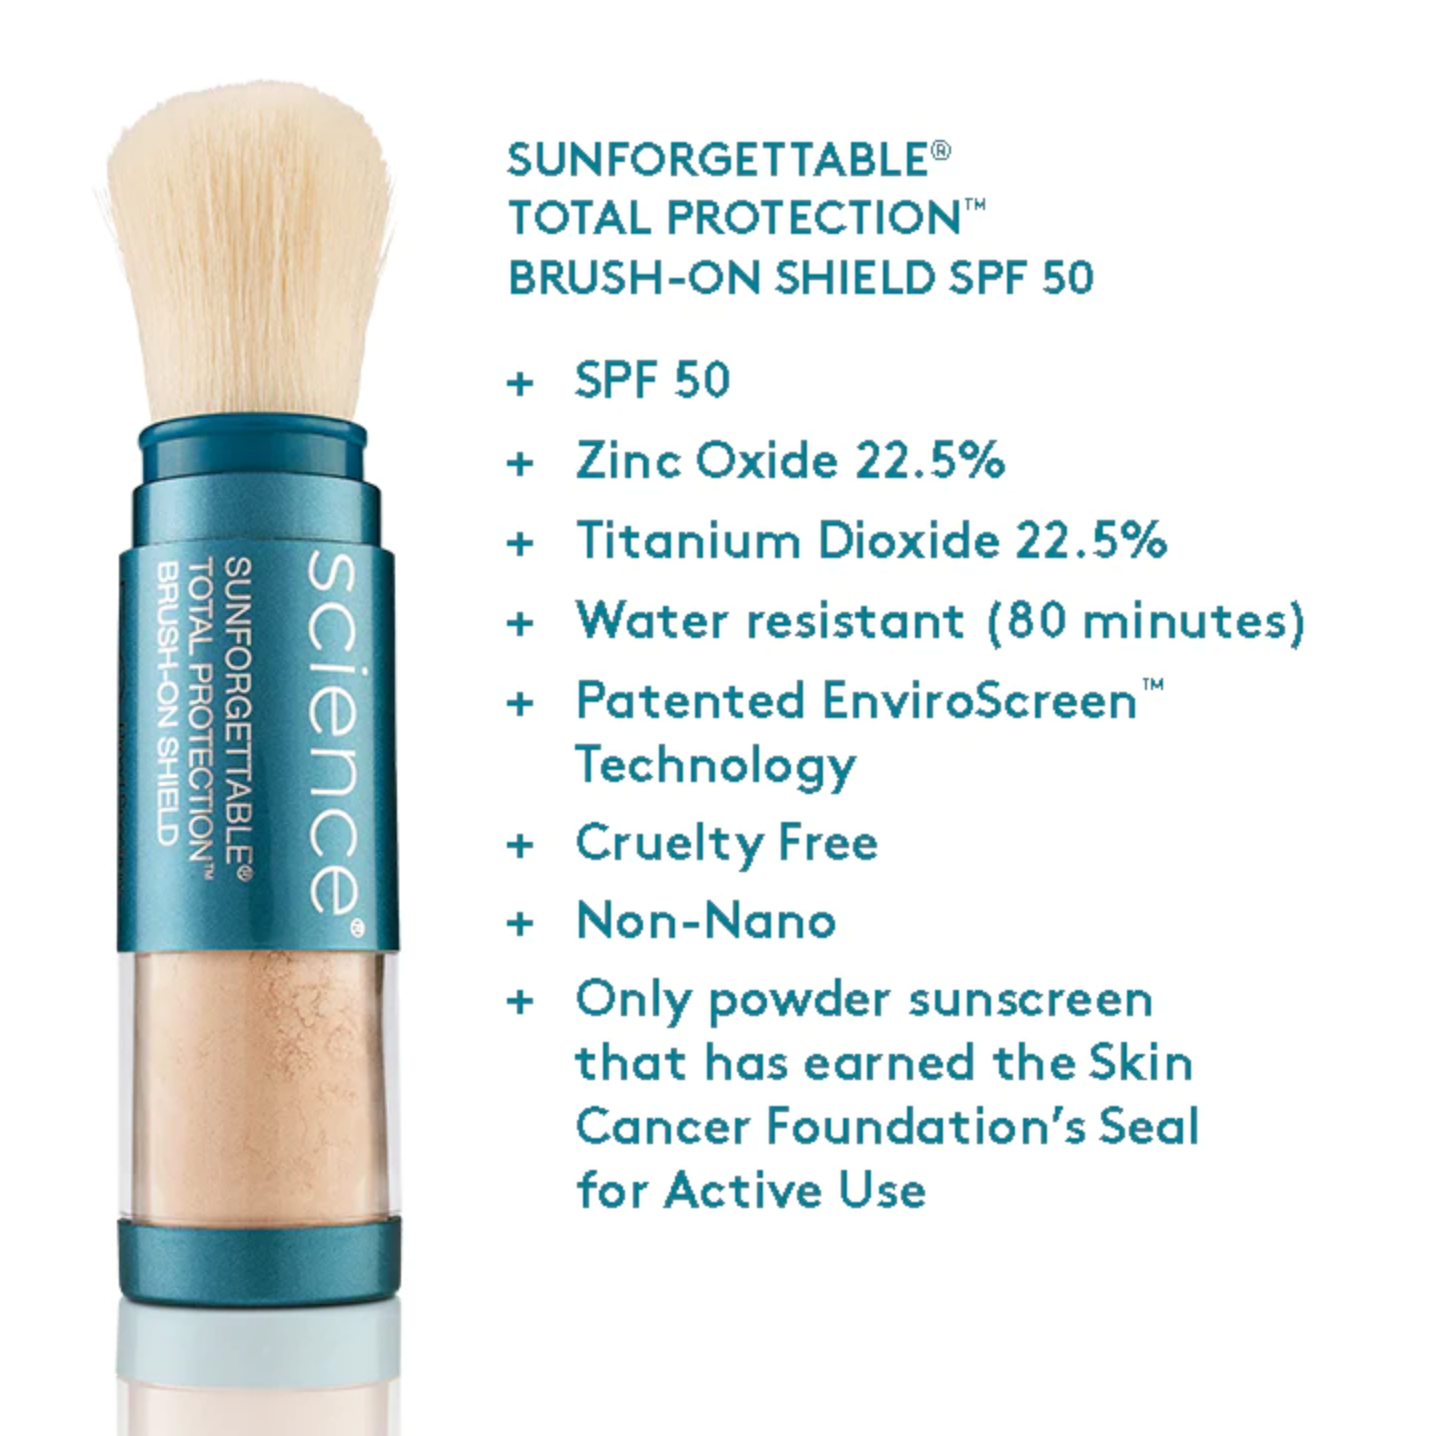 SUNFORGETTABLE® TOTAL PROTECTION™ BRUSH-ON SHIELD SPF 50 MULTIPACK